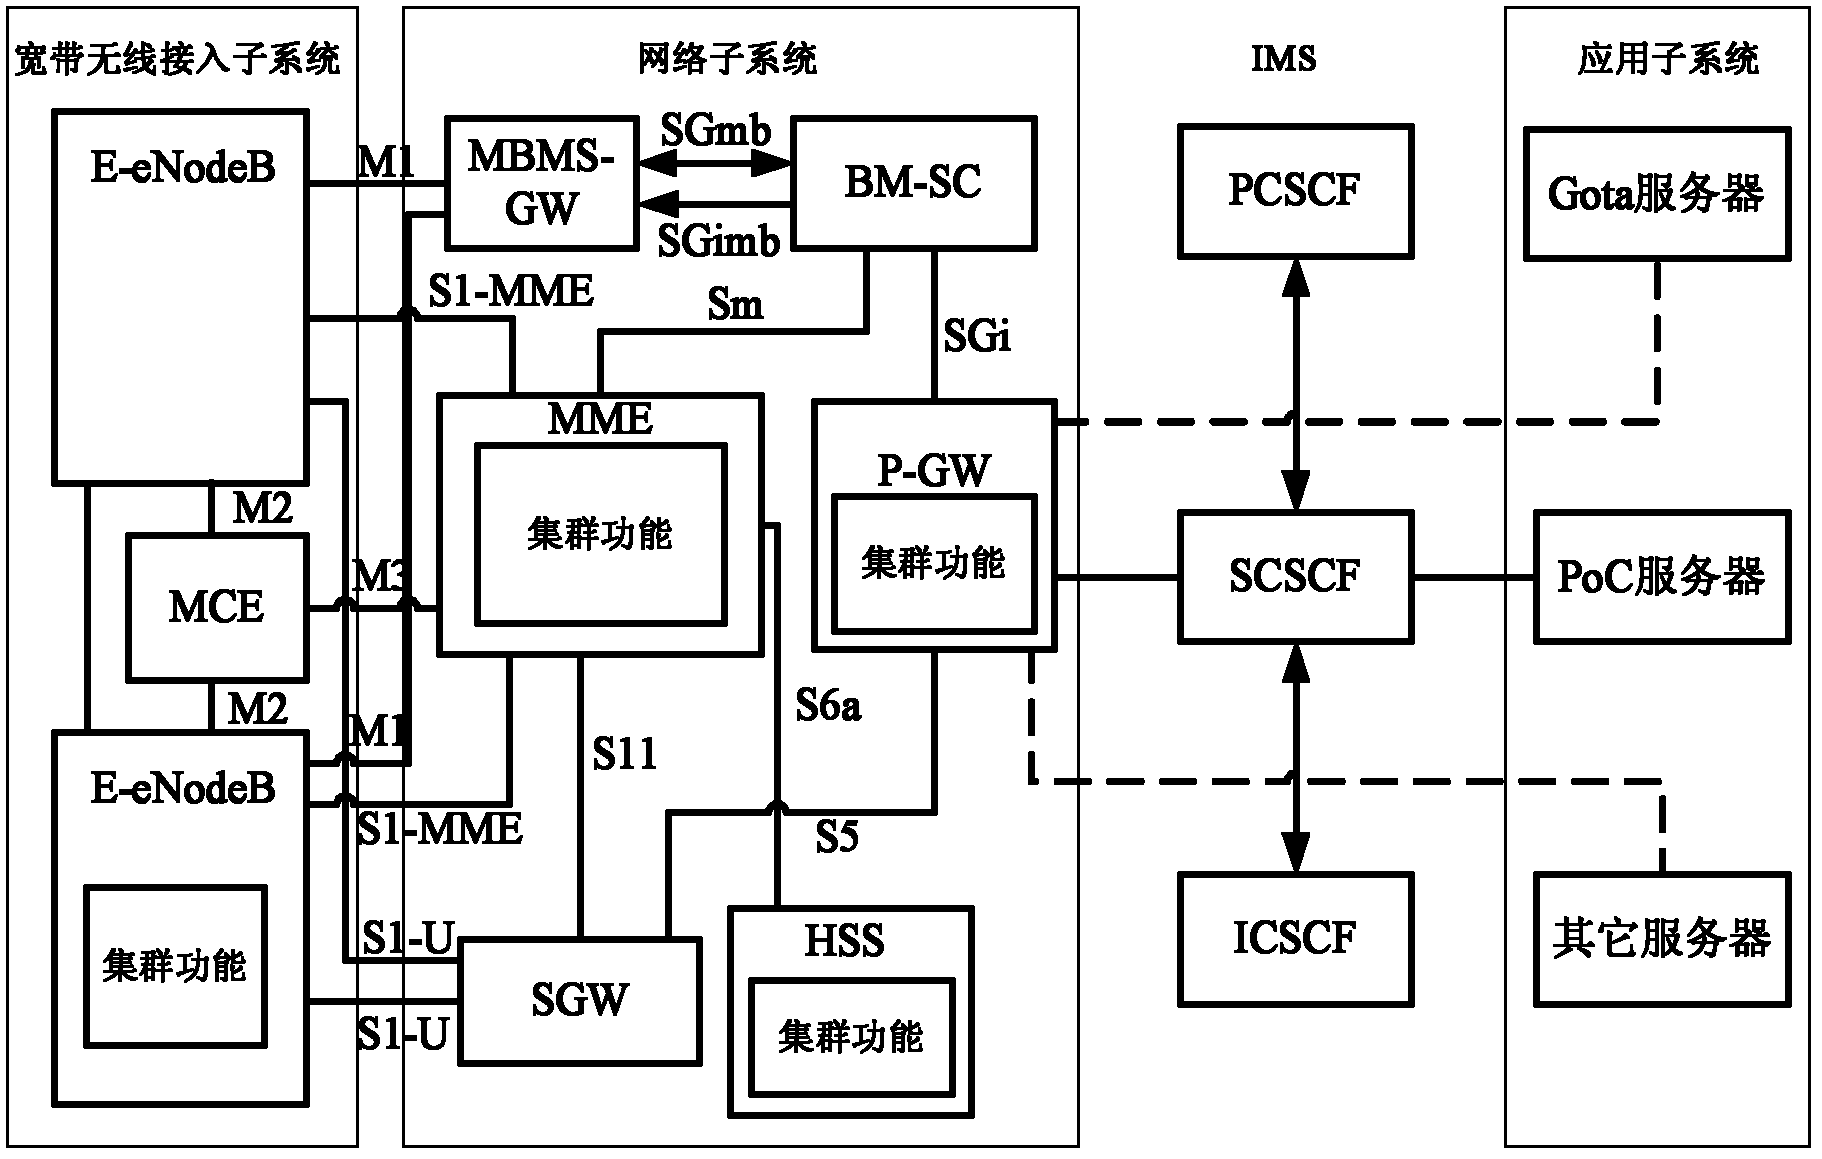 Wideband digital cluster system based on TD-LTE (time division-long term evolution) and data transmission method thereof